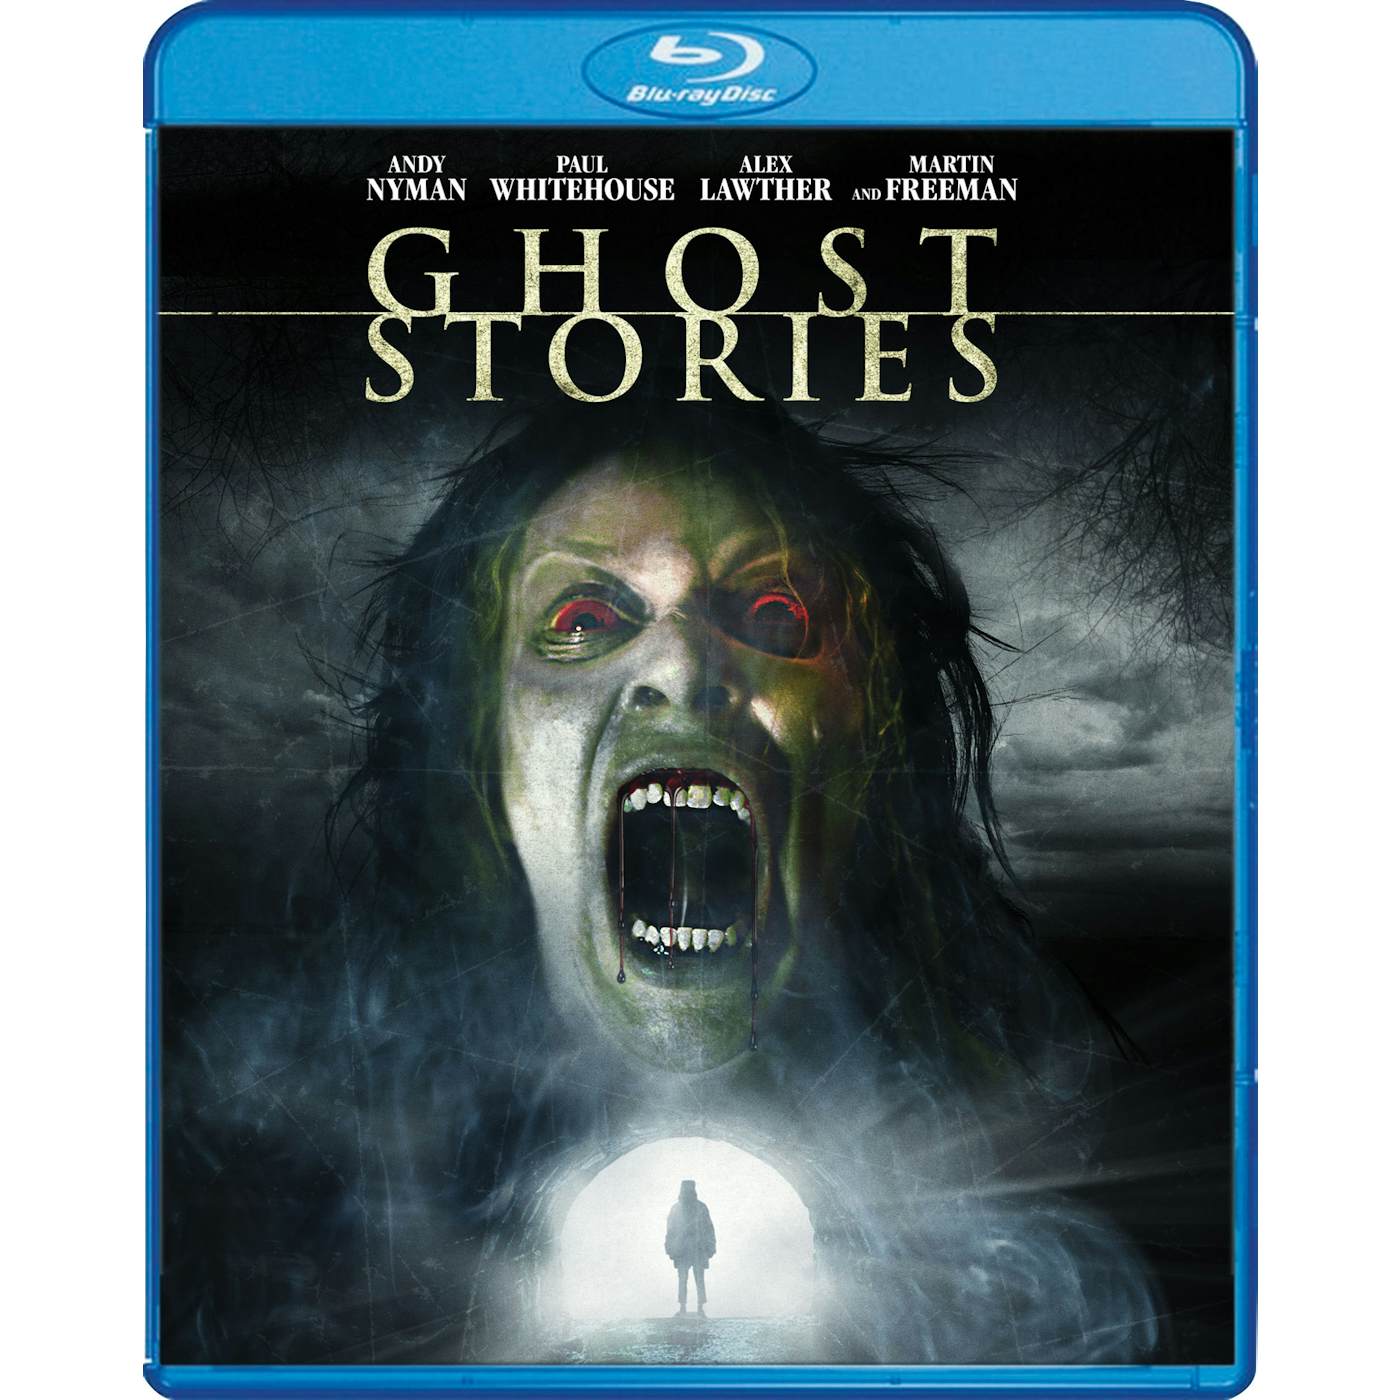 GHOST STORIES Blu-ray